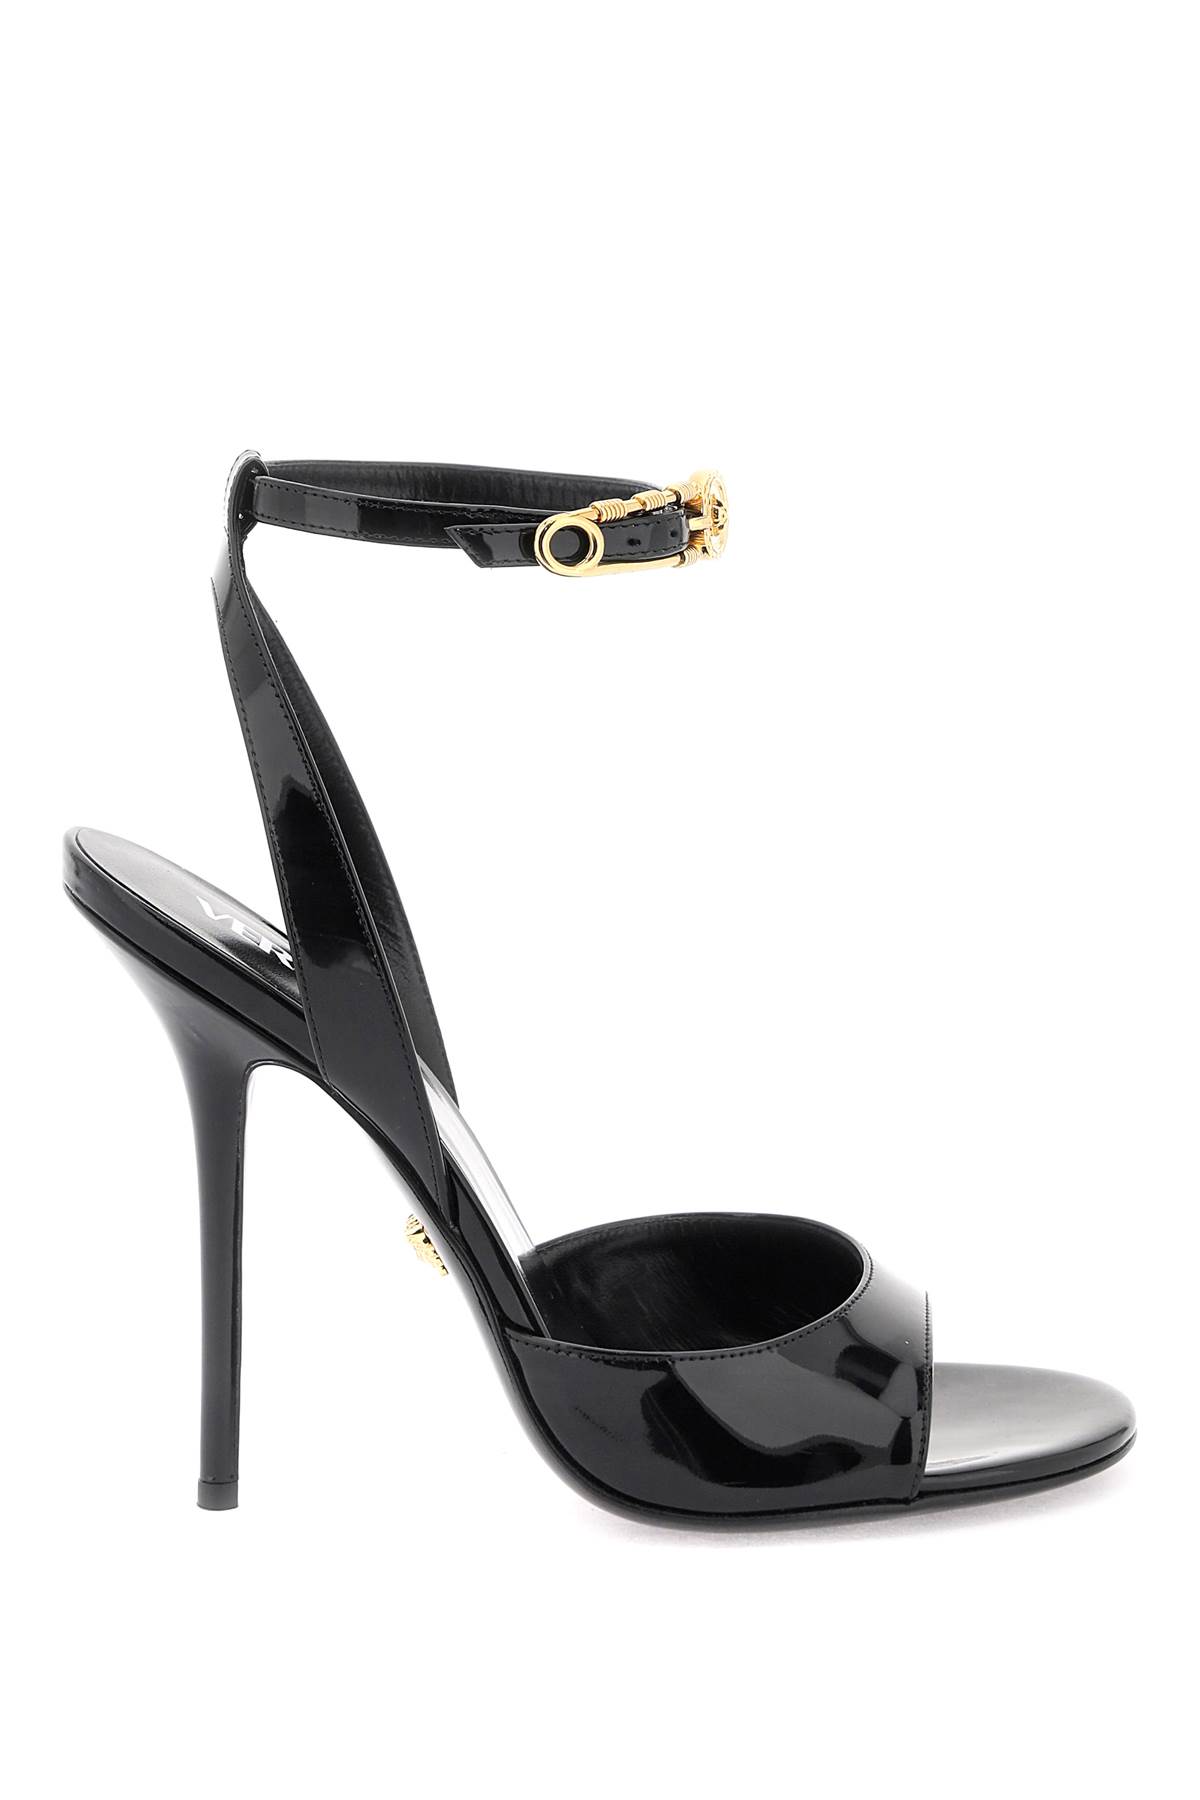 VERSACE SAFETY PIN PATENT LEATHER SANDALS